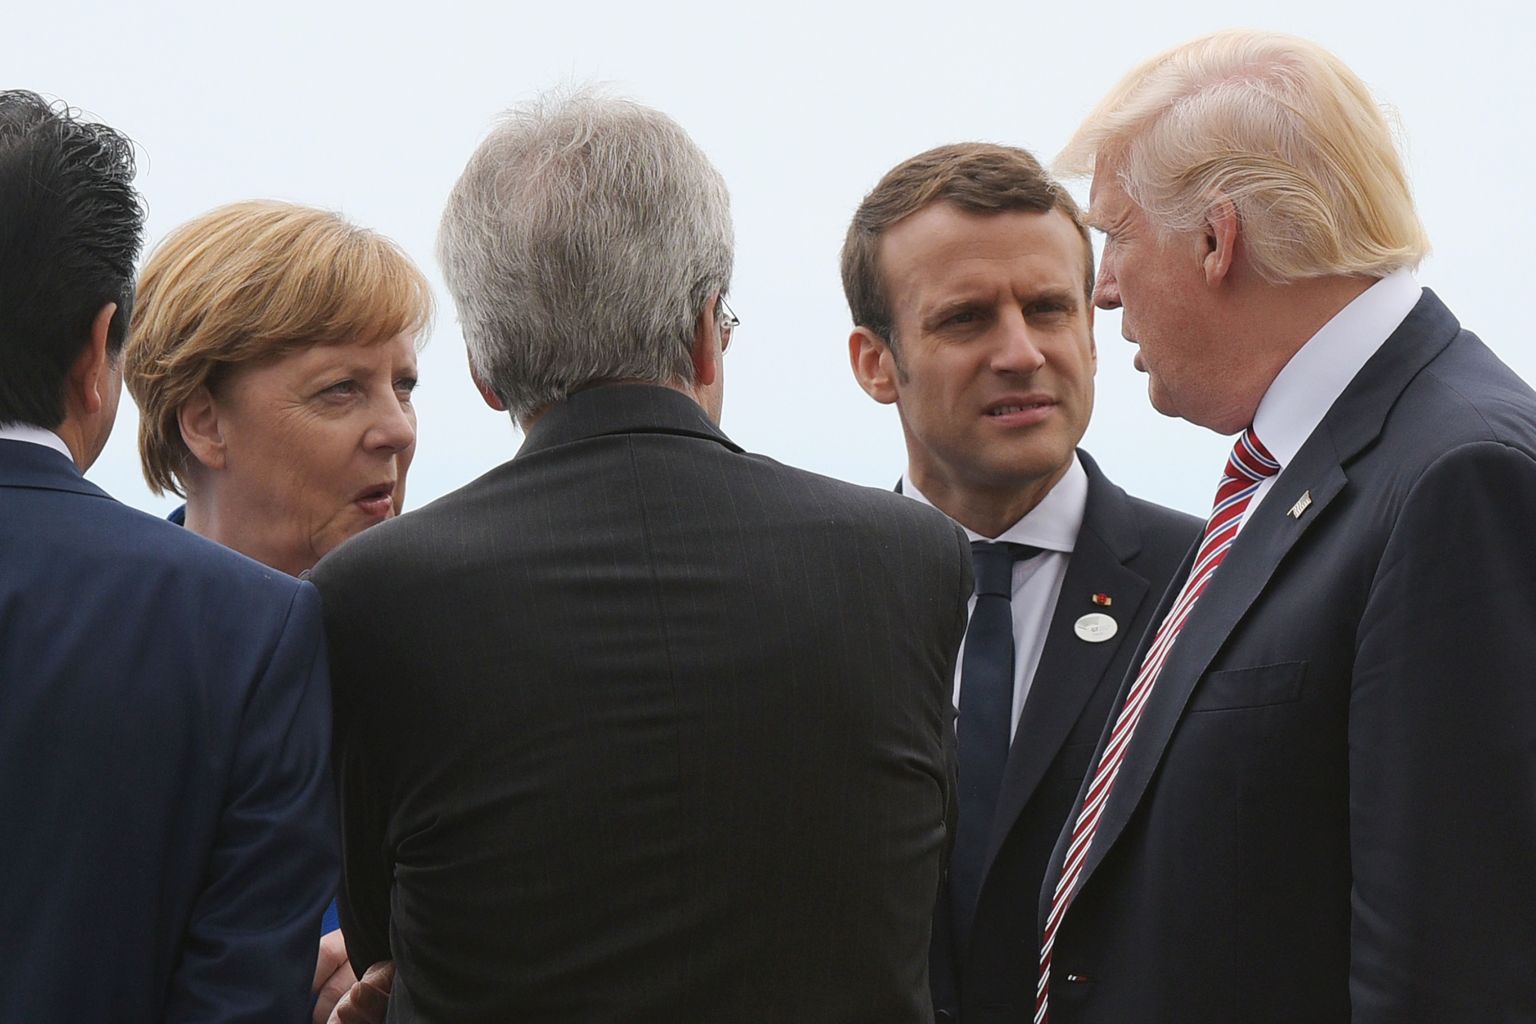 TOPSHOT - German Chancellor Angela Merkel (L) and French President Emmanuel Macron (2ndR) listen to US President Donald Trump at the Belvedere of Taormina during the Summit of the Heads of State and of Government of the G7, the group of most industrialized economies, plus the European Union, on May 26, 2017 in Sicily. The leaders of Britain, Canada, France, Germany, Japan, the US and Italy will be joined by representatives of the European Union and the International Monetary Fund (IMF) as well as teams from Ethiopia, Kenya, Niger, Nigeria and Tunisia during the summit from May 26 to 27, 2017. / AFP PHOTO / MANDEL NGAN (Photo credit should read MANDEL NGAN/AFP/Getty Images)